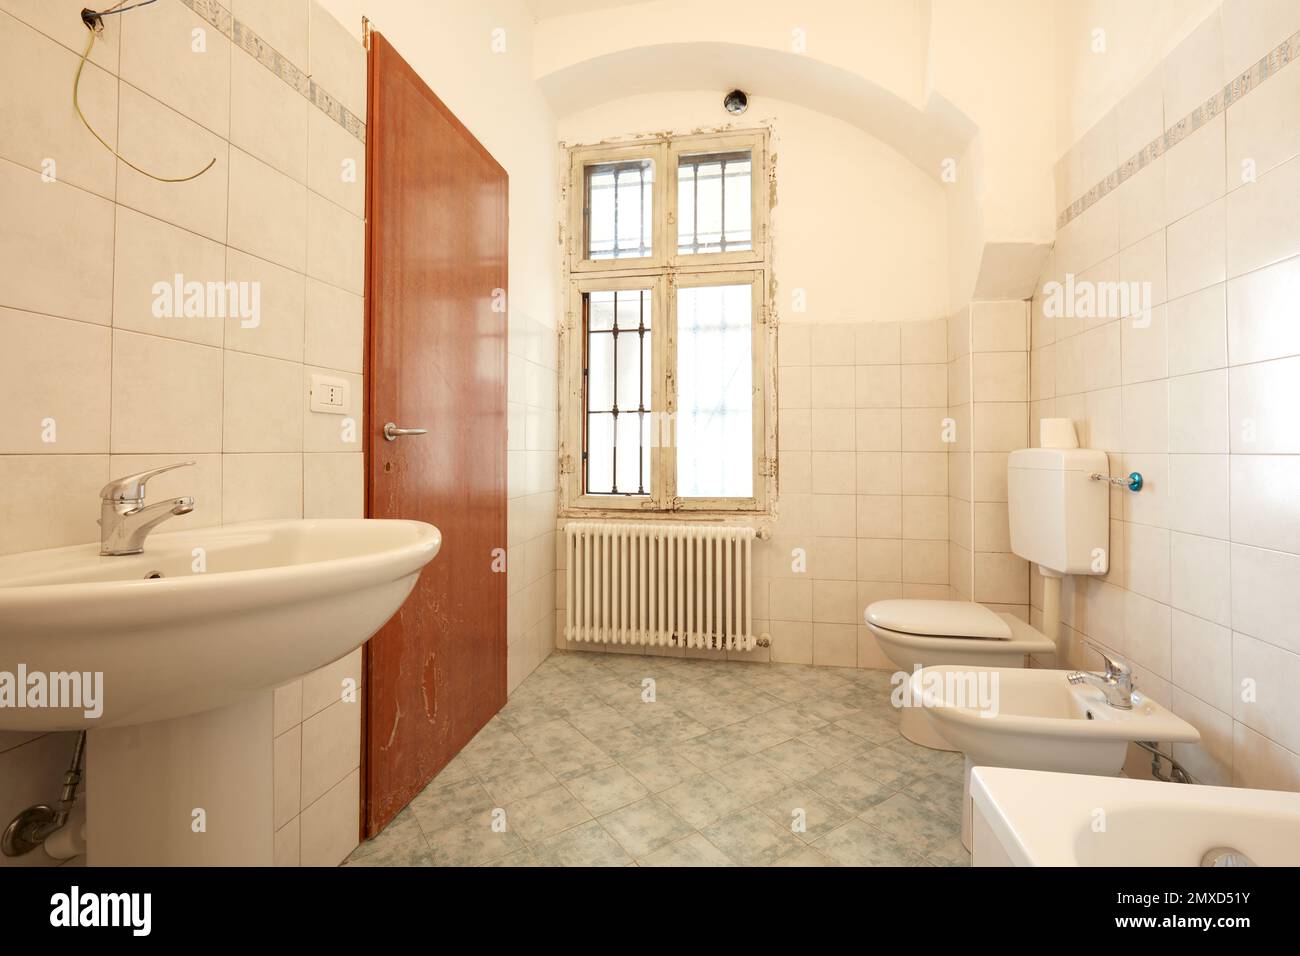 Old bathroom in apartment interior in old country house Stock Photo